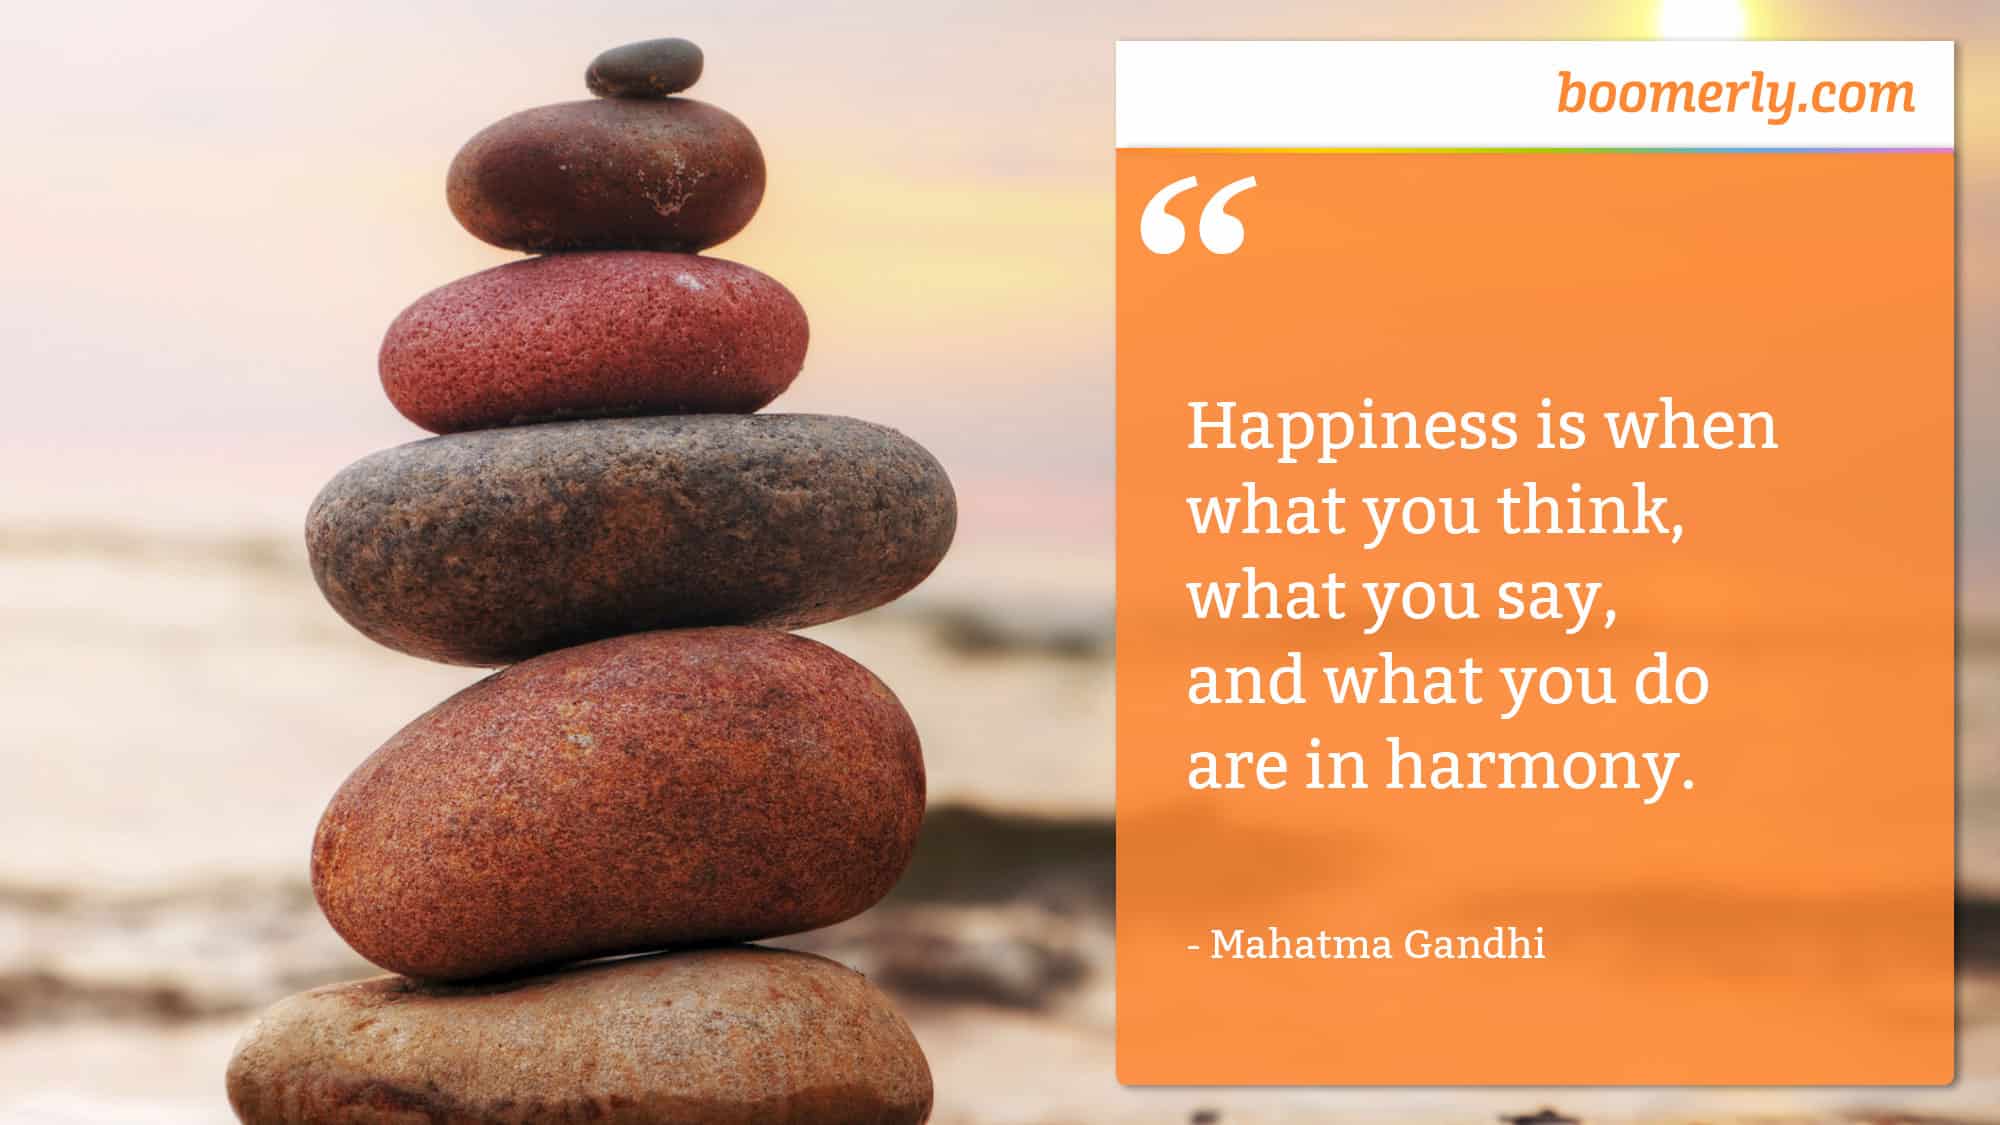 “Happiness is when what you think, what you say, and what you do are in harmony.” - Mahatma Gandhi